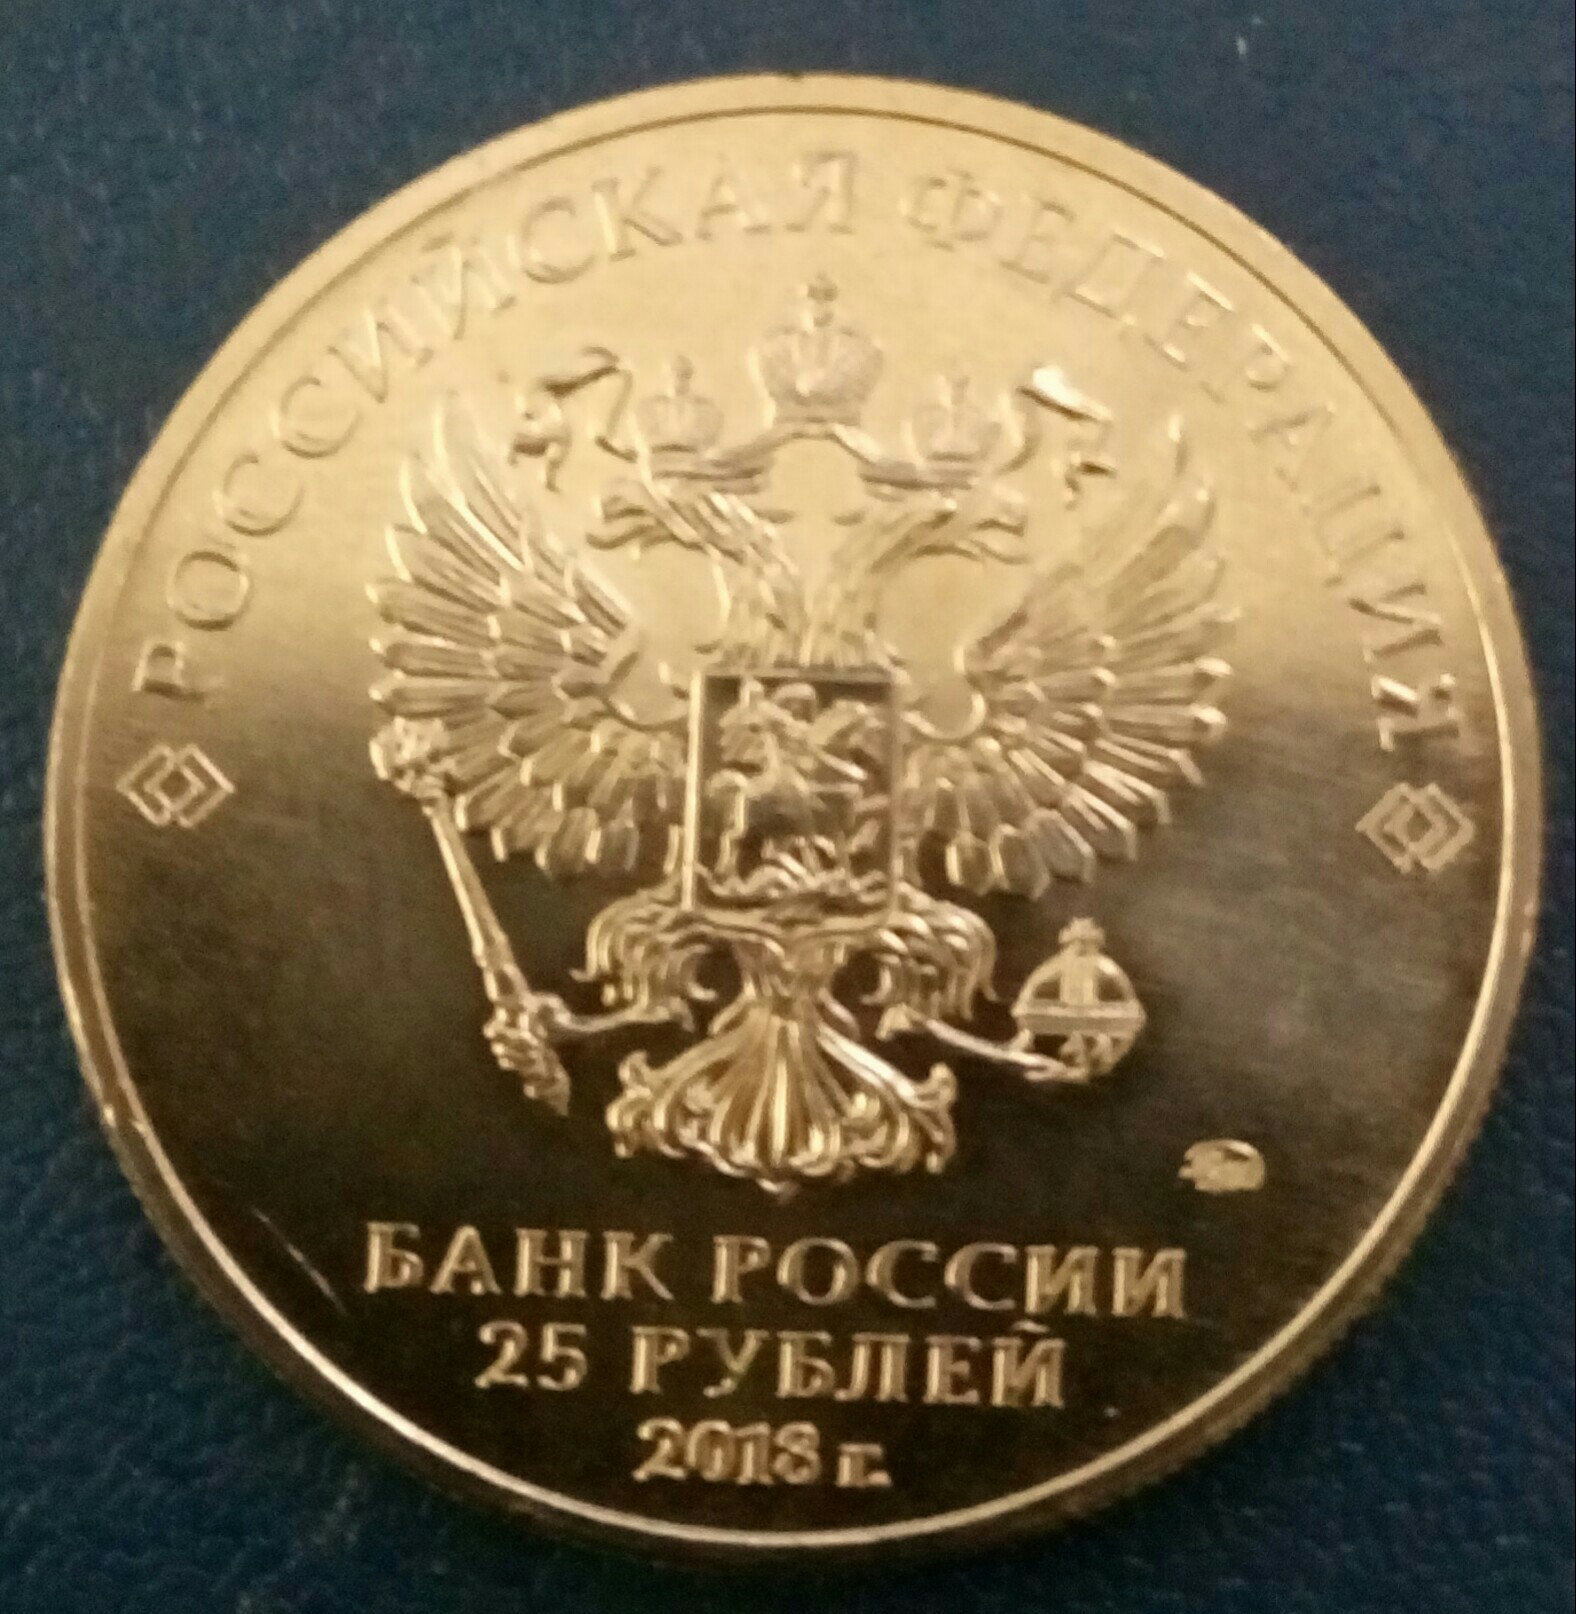 Coin from the future - Central Bank of the Russian Federation, 2018 FIFA World Cup, , Coin, Money